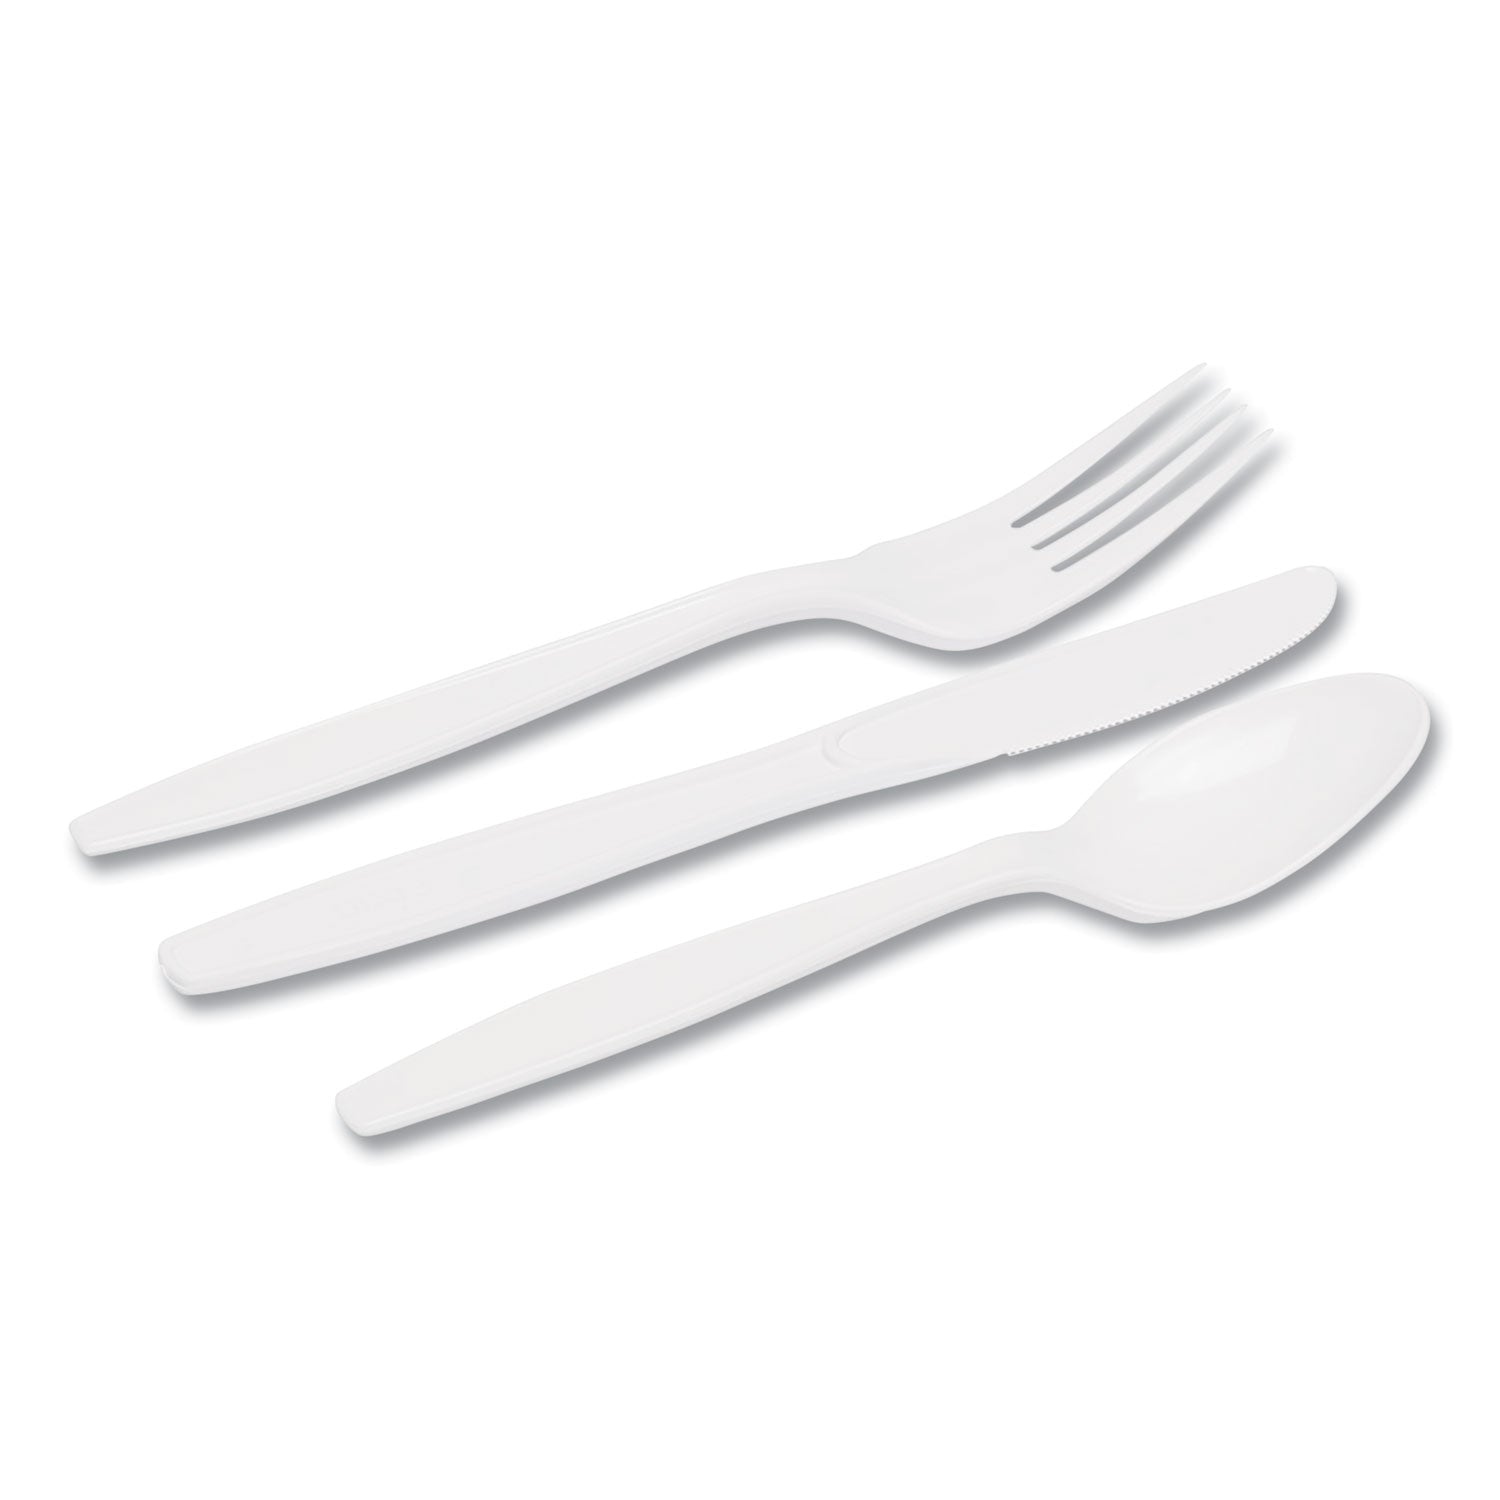 Combo Pack, Tray with White Plastic Utensils, 56 Forks, 56 Knives, 56 Spoons - 